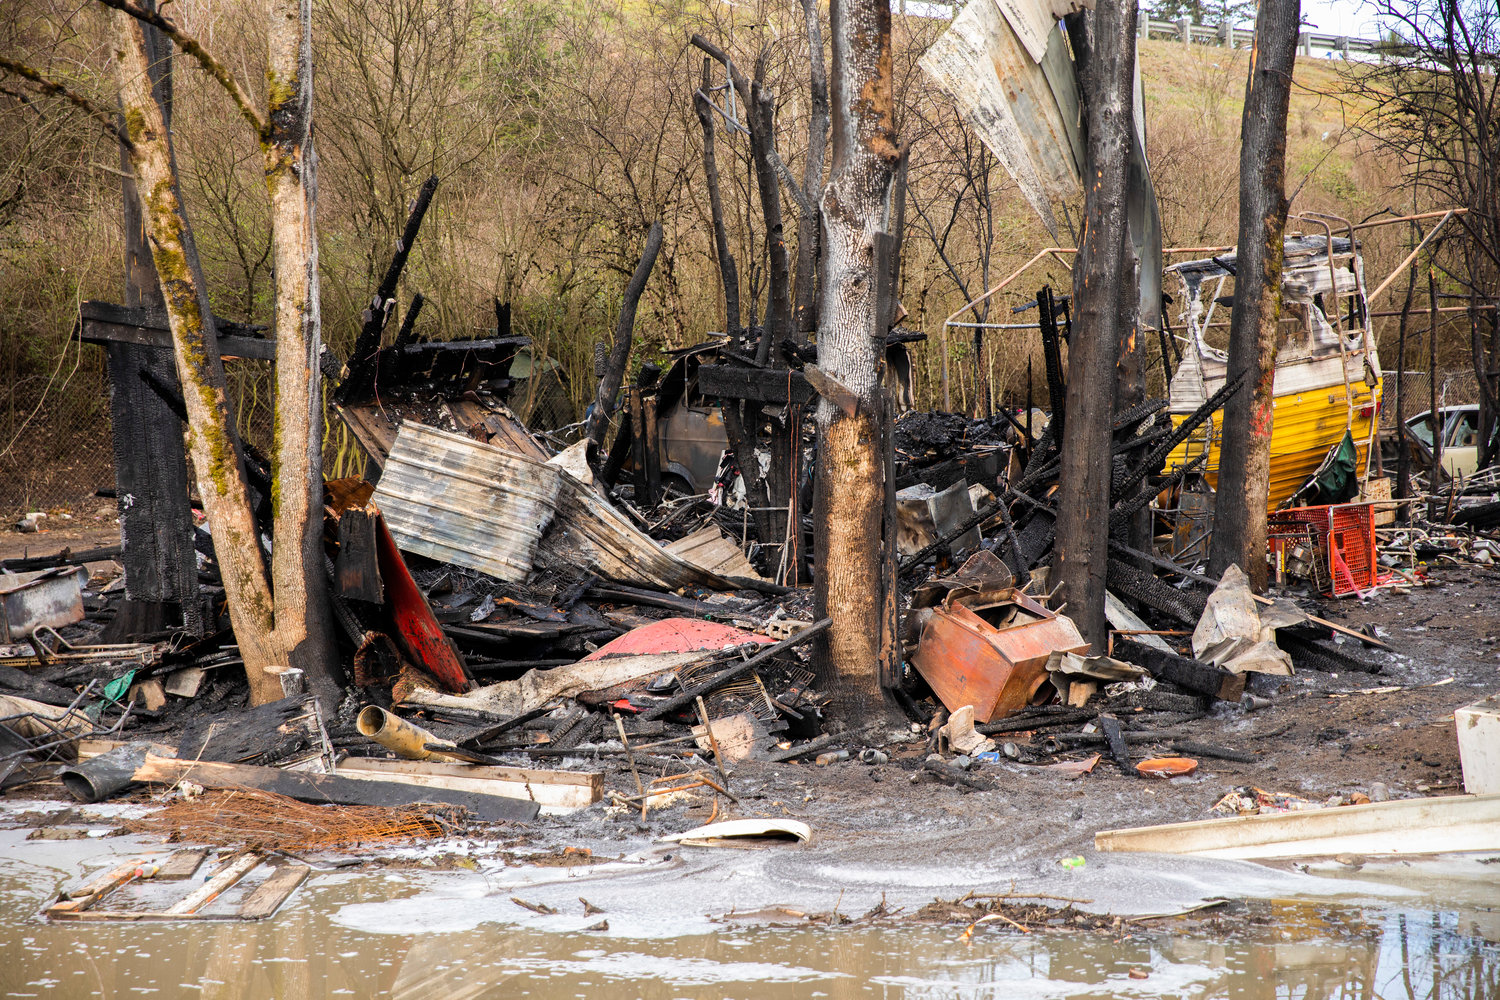 Charred debris are left Wednesday morning after a structure fire inside a homeless encampment near Blakeslee Junction on Tuesday, March 28, 2023.